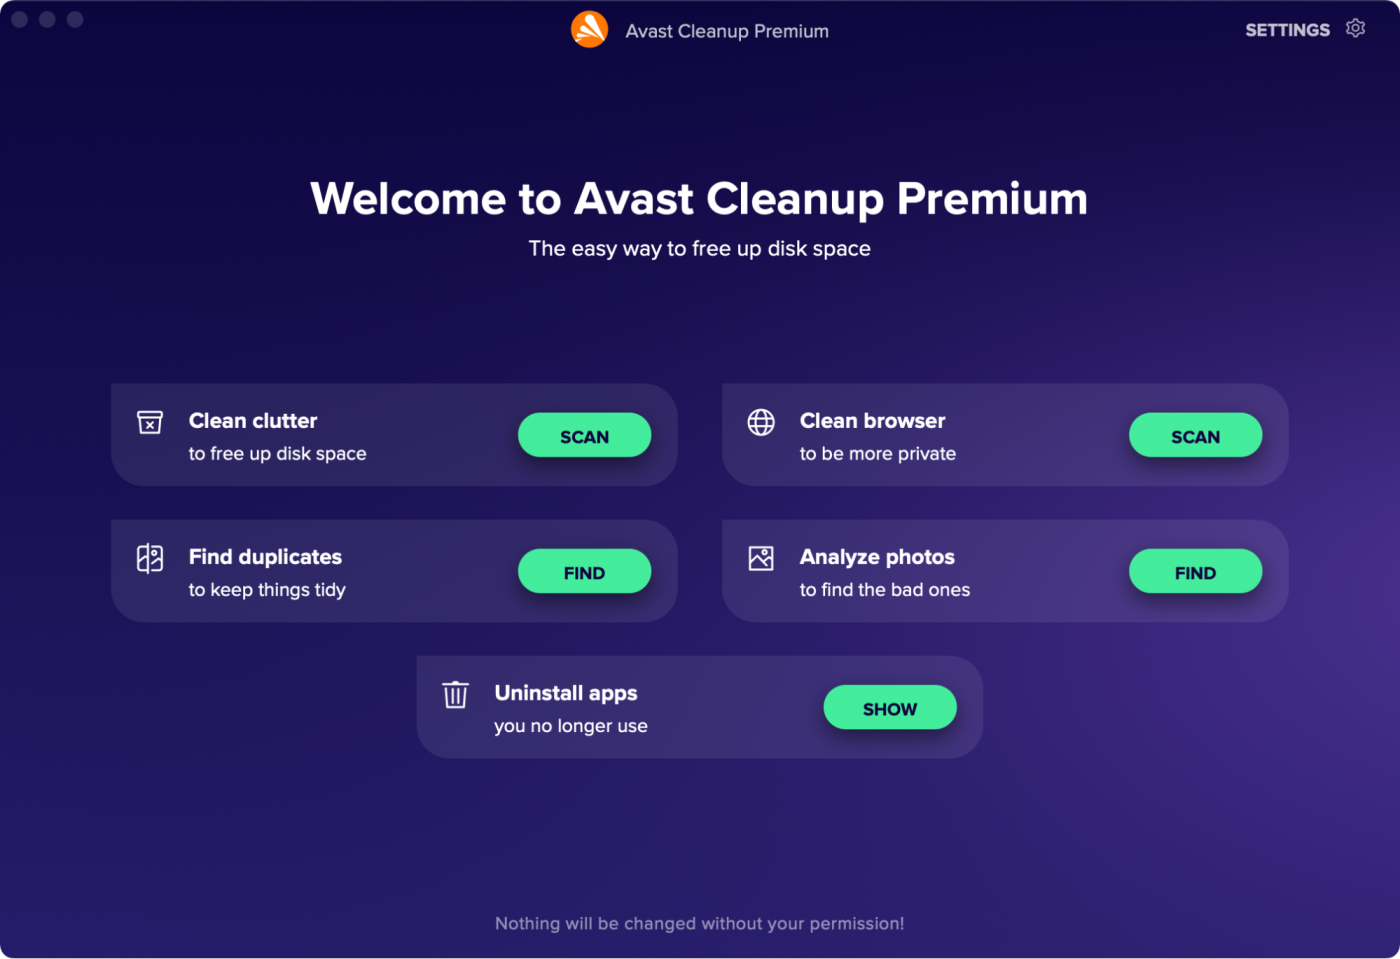 The main screen of Avast, with all the options for cleaning your Mac